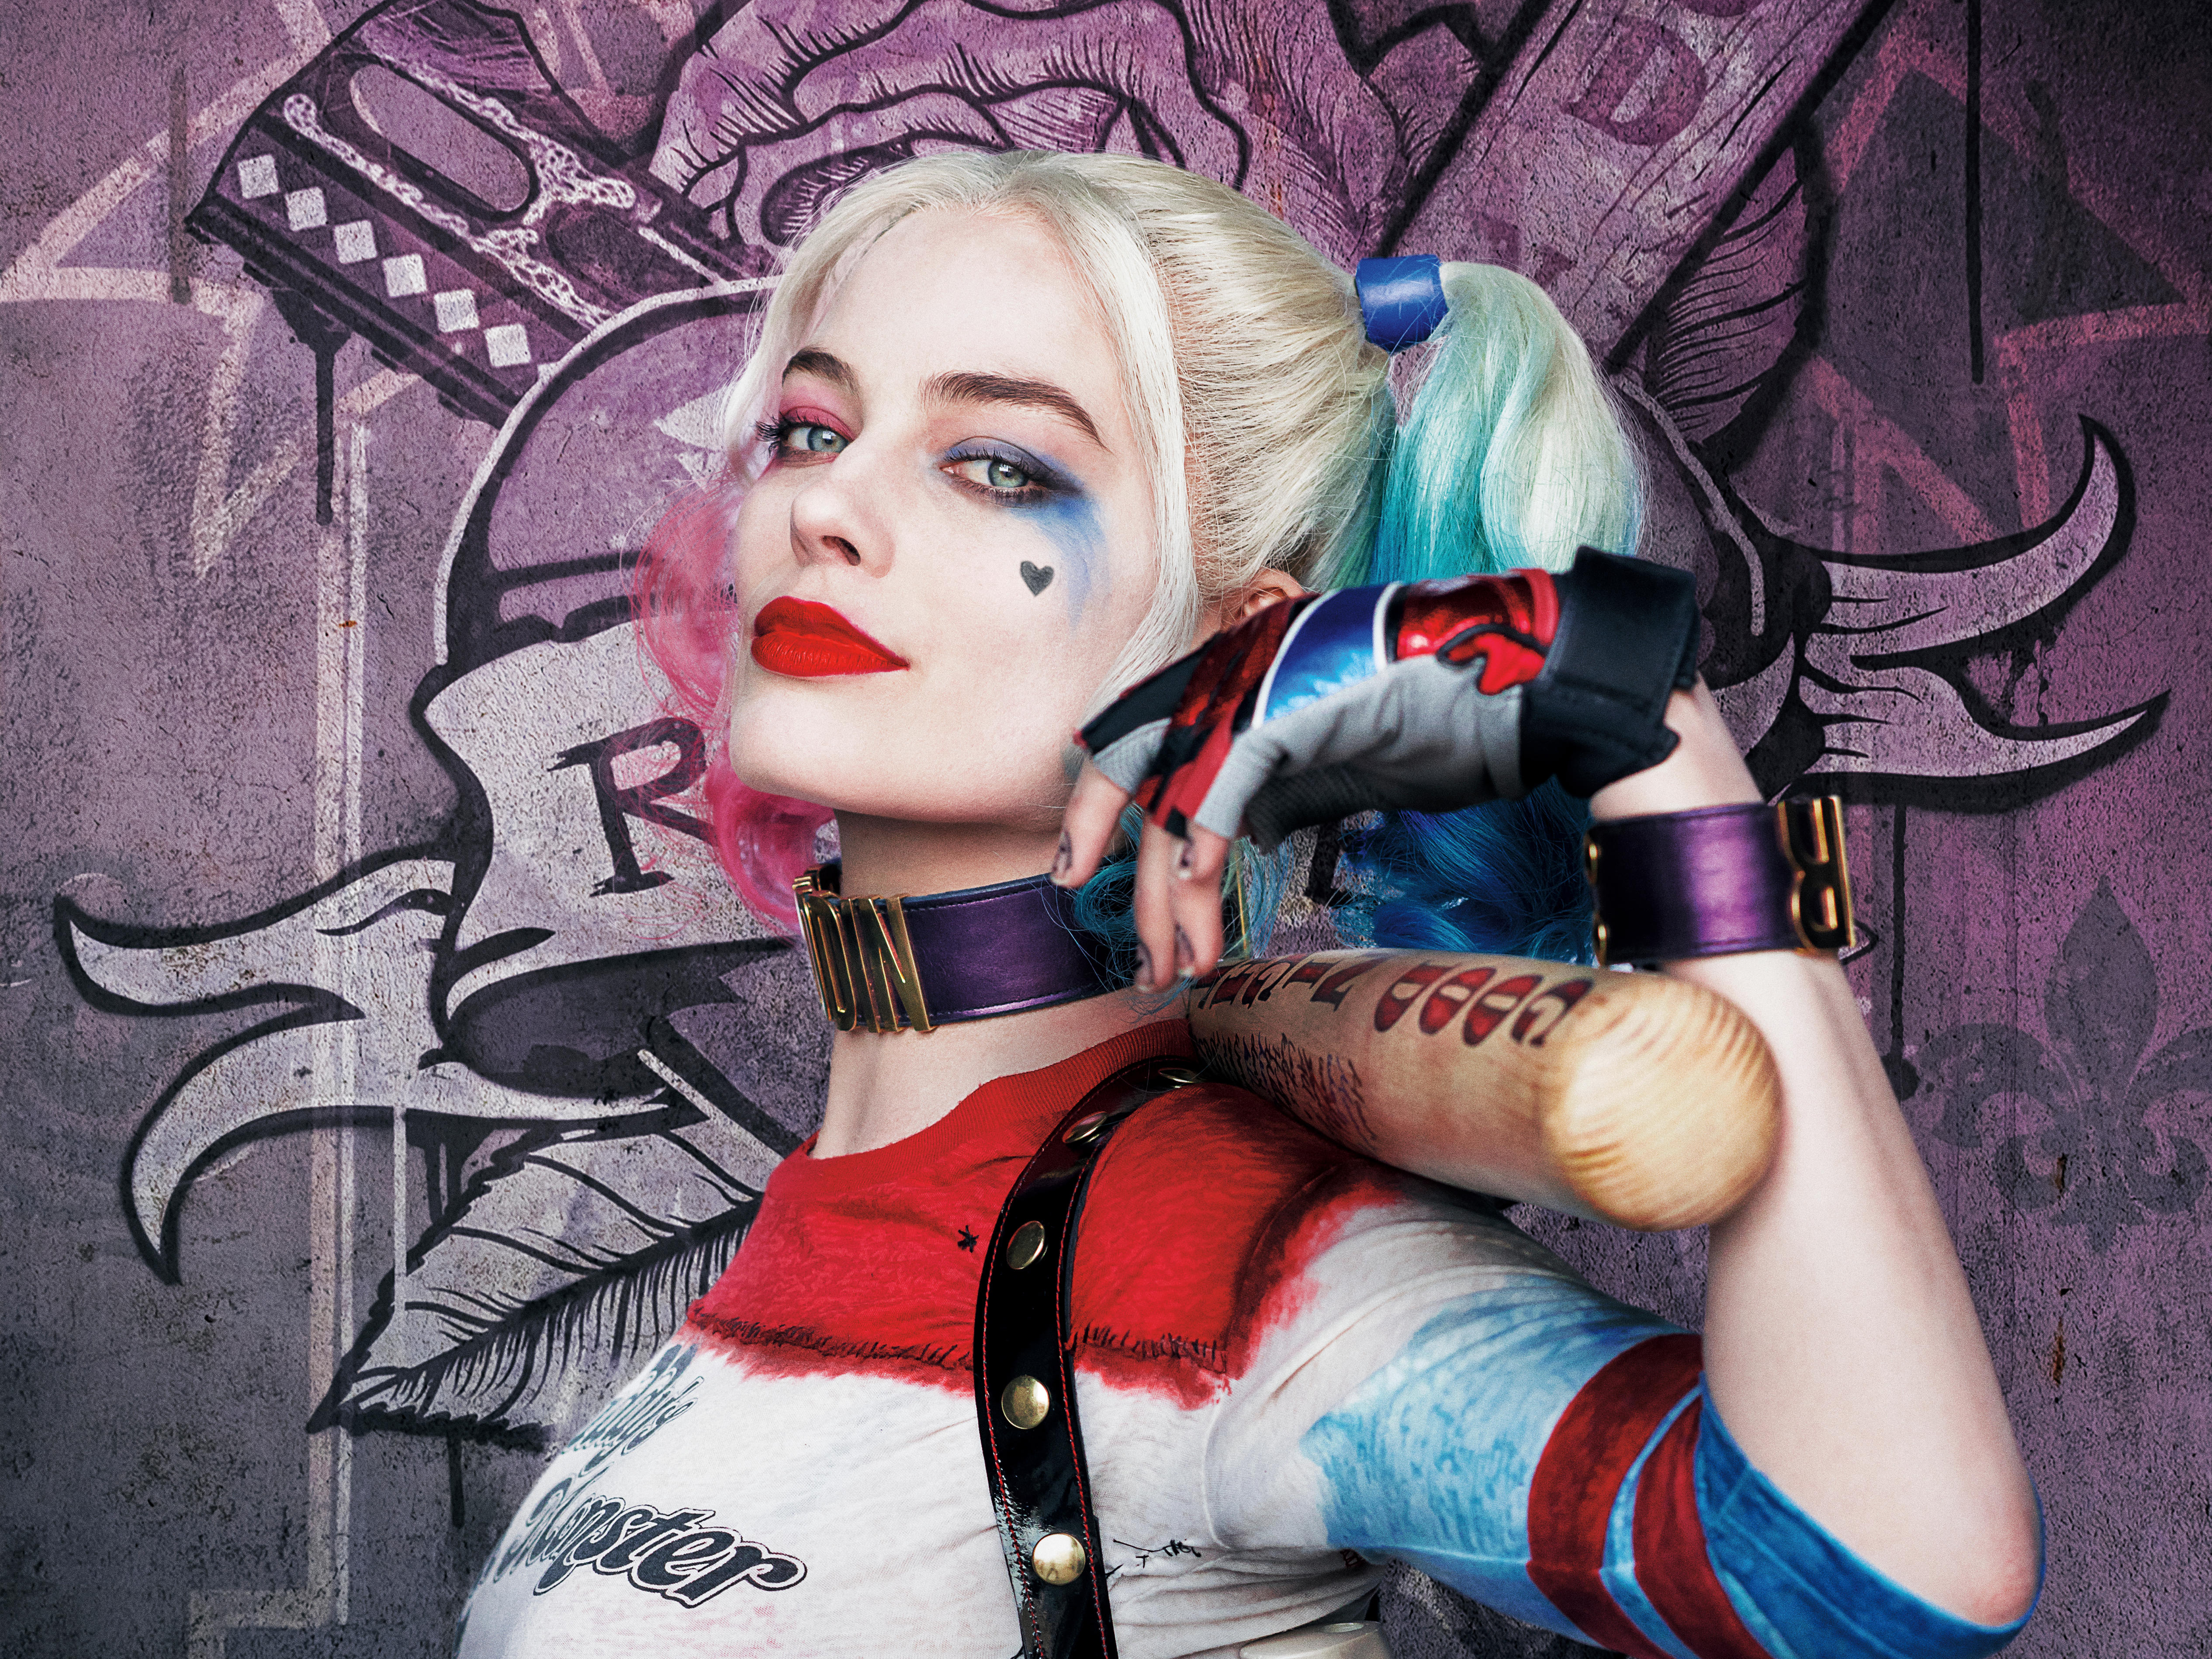 margot robbie, movie, suicide squad, harley quinn, harleen quinzel, dc comics, two toned hair High Definition image